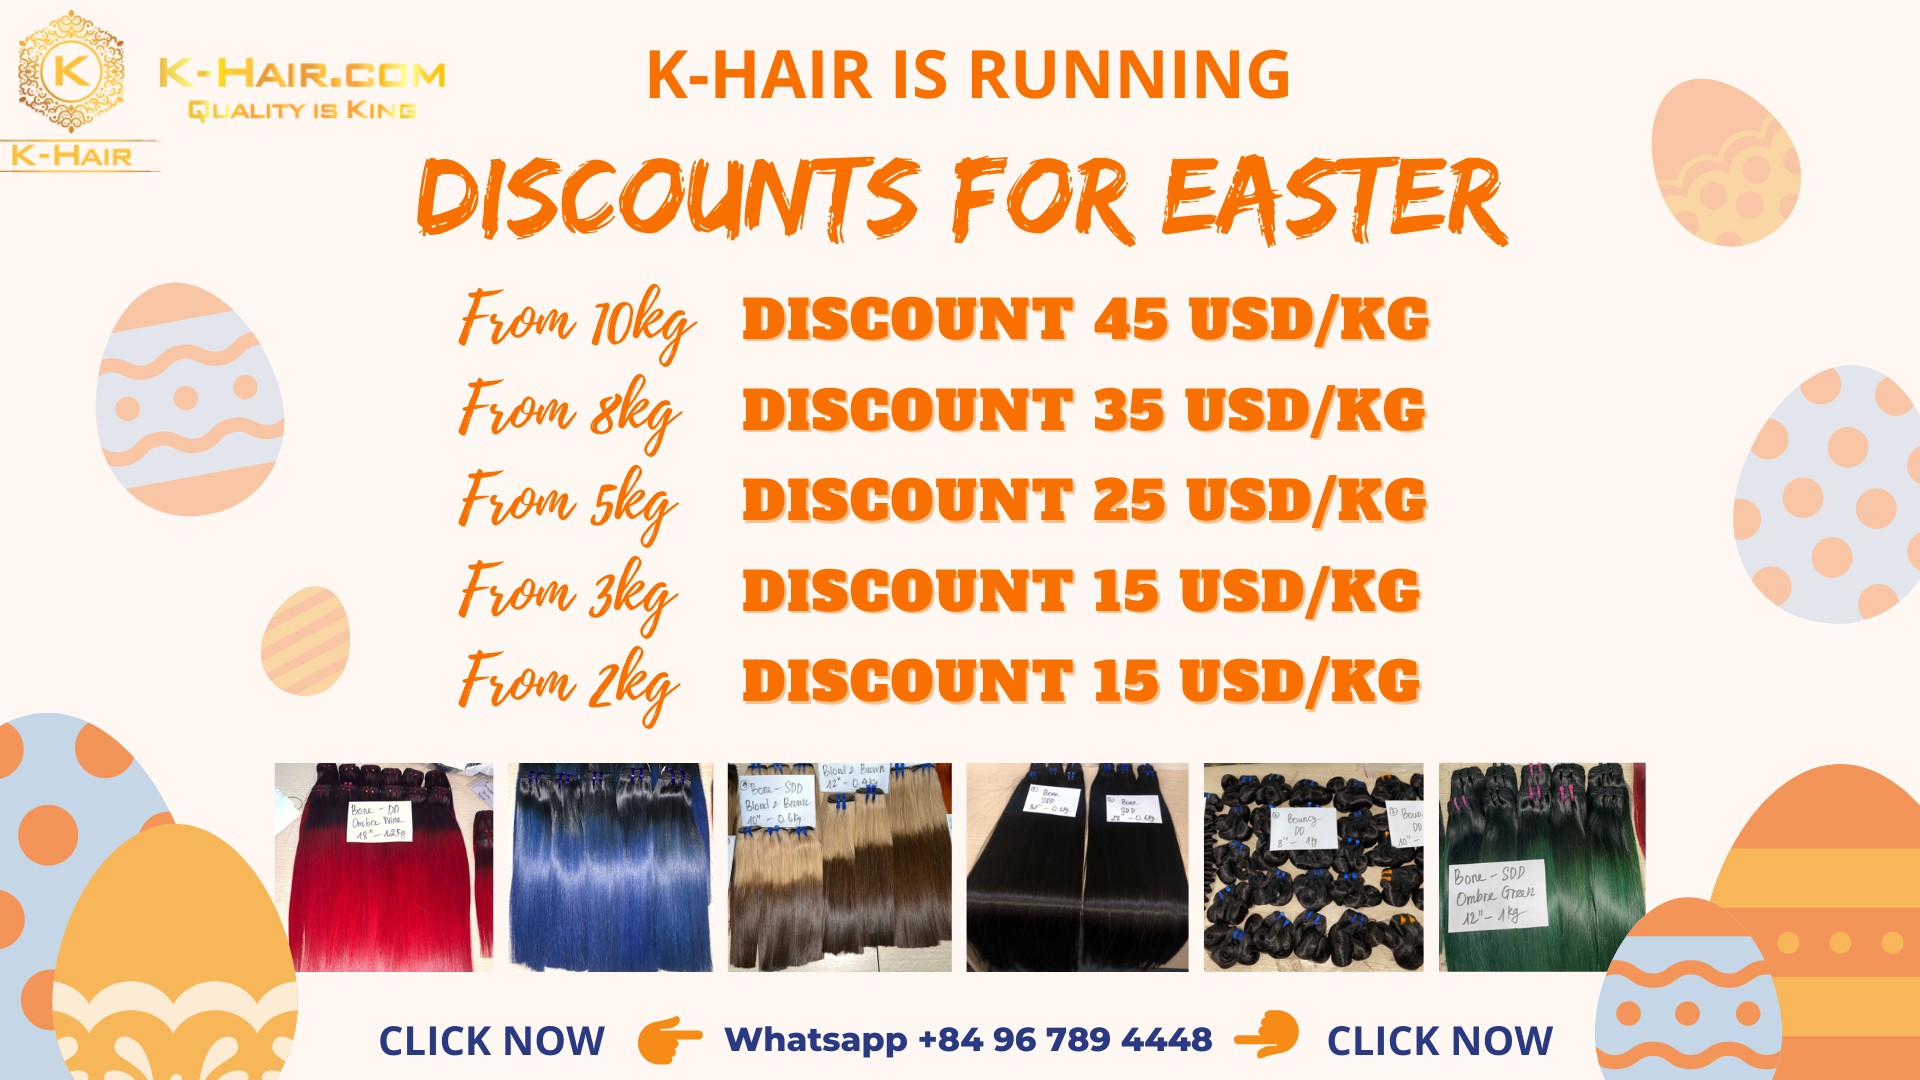 k-hair-discounts-for-easter-deal